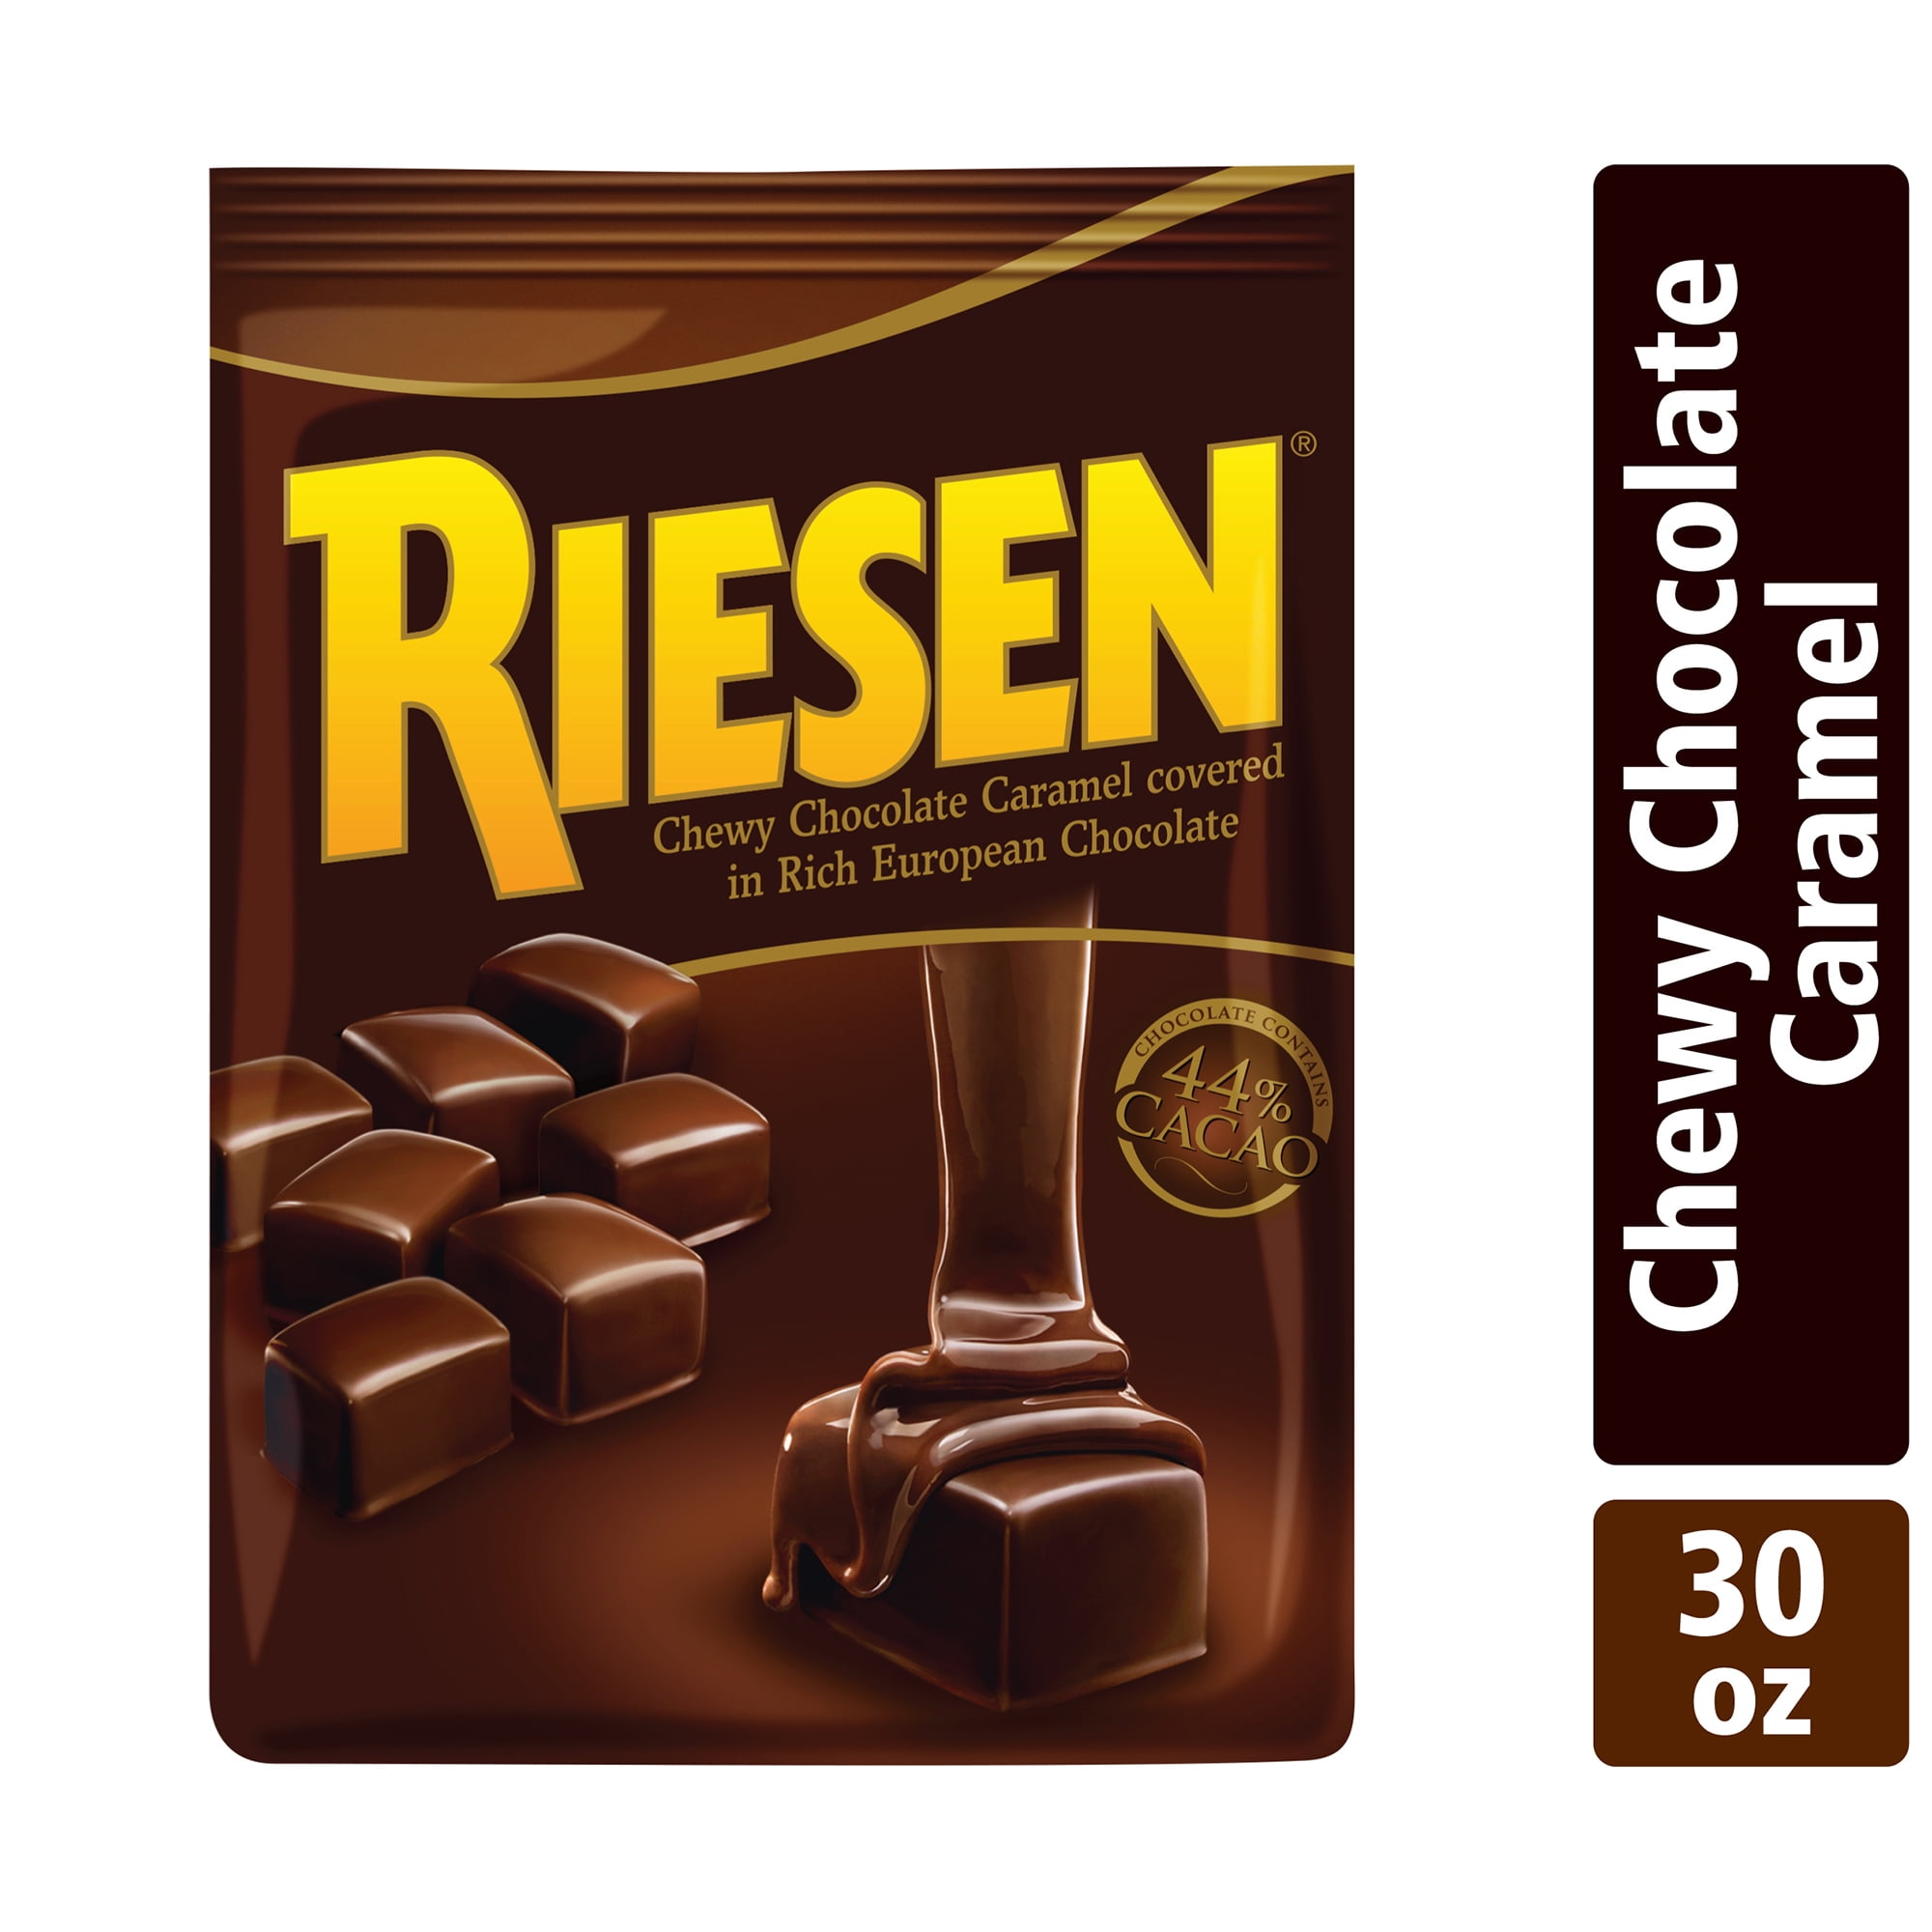 Riesen Chocolate Covered Chewy Caramel Candy, 30.08 oz